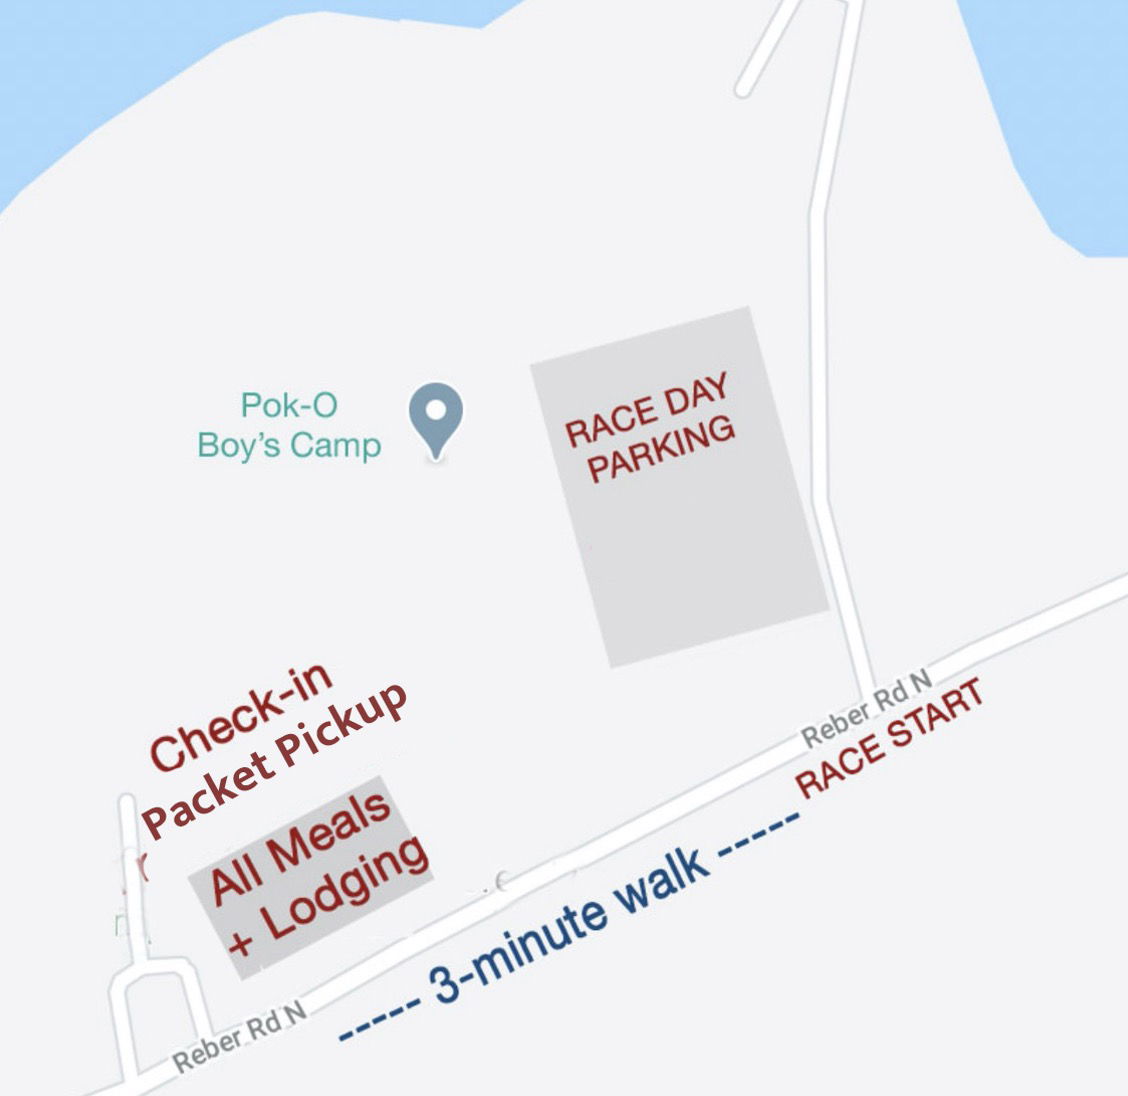 Directions to Check-in & Race Start